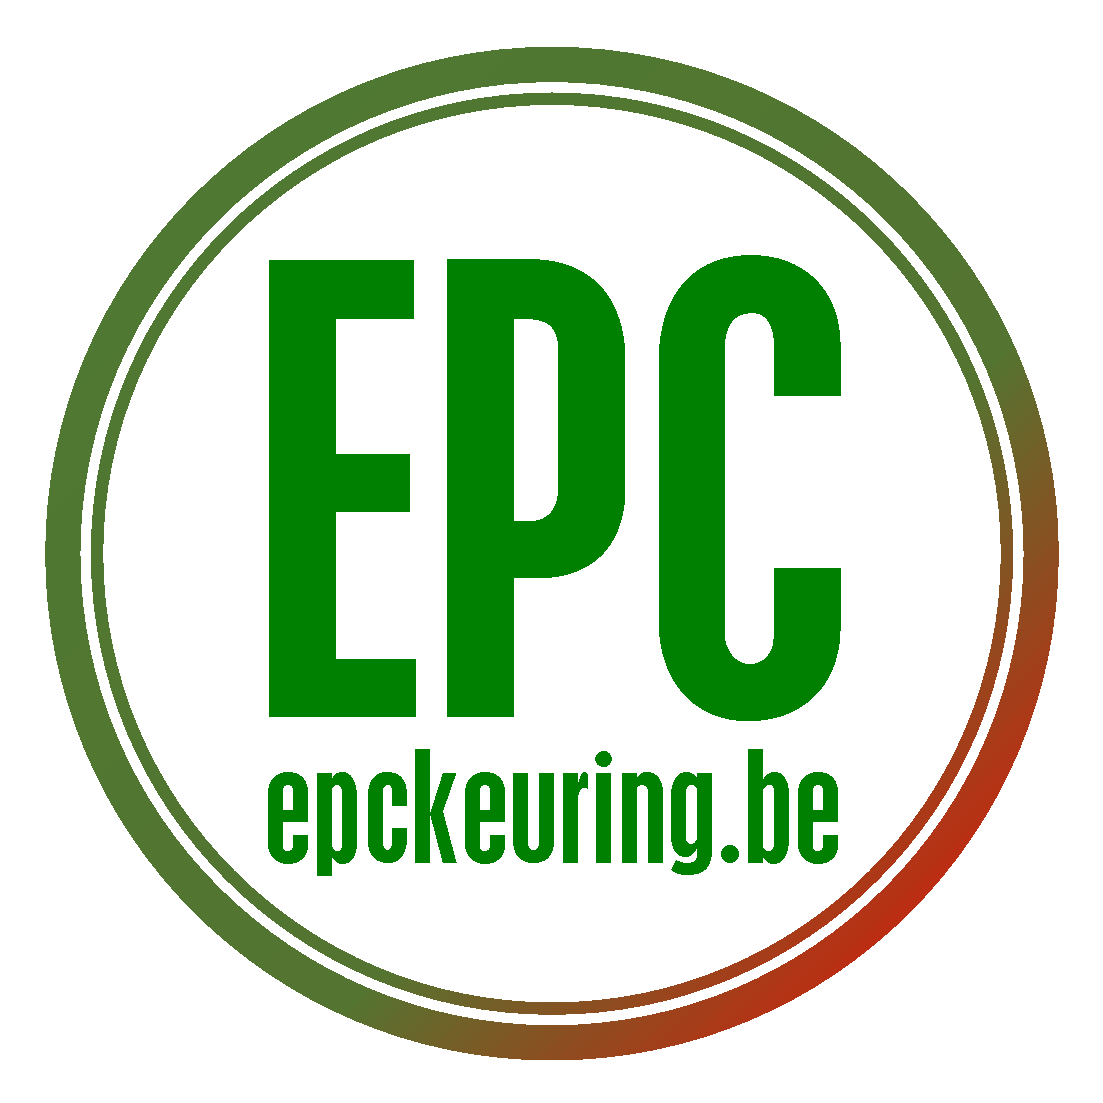 www.epckeuring.be